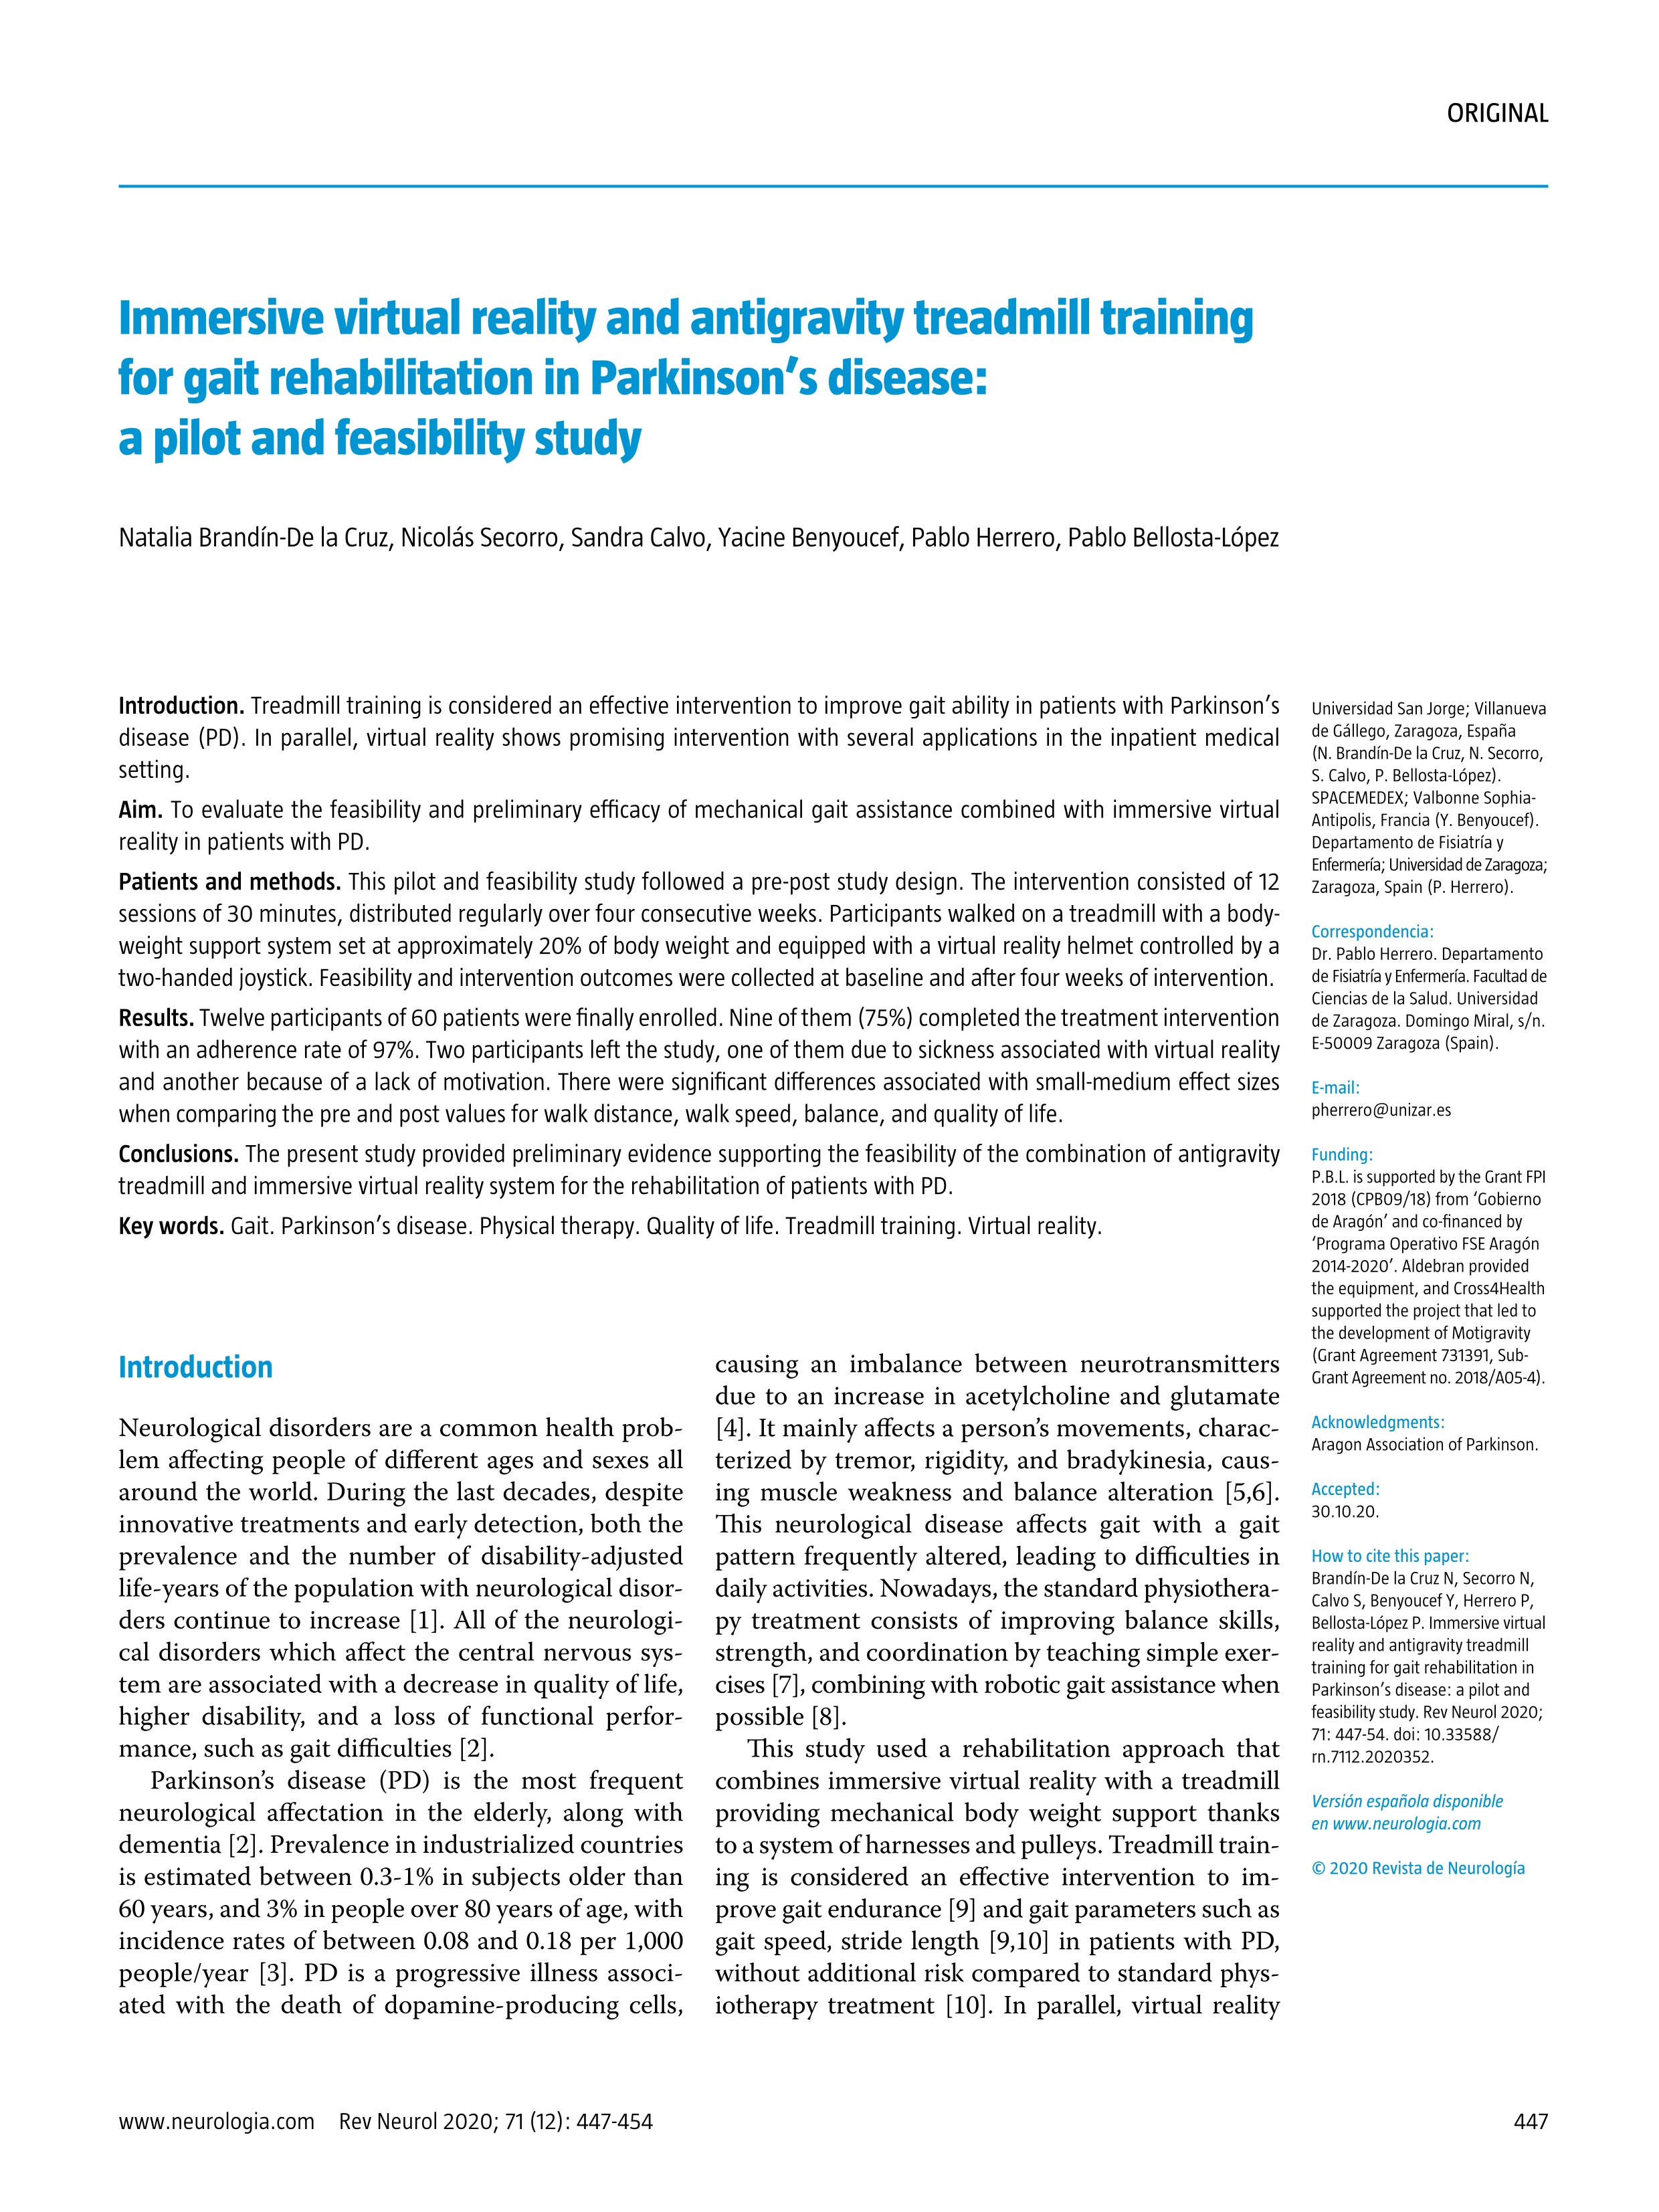 Immersive virtual reality and antigravity treadmill training for gait rehabilitation in Parkinson’s disease: A pilot and feasibility study